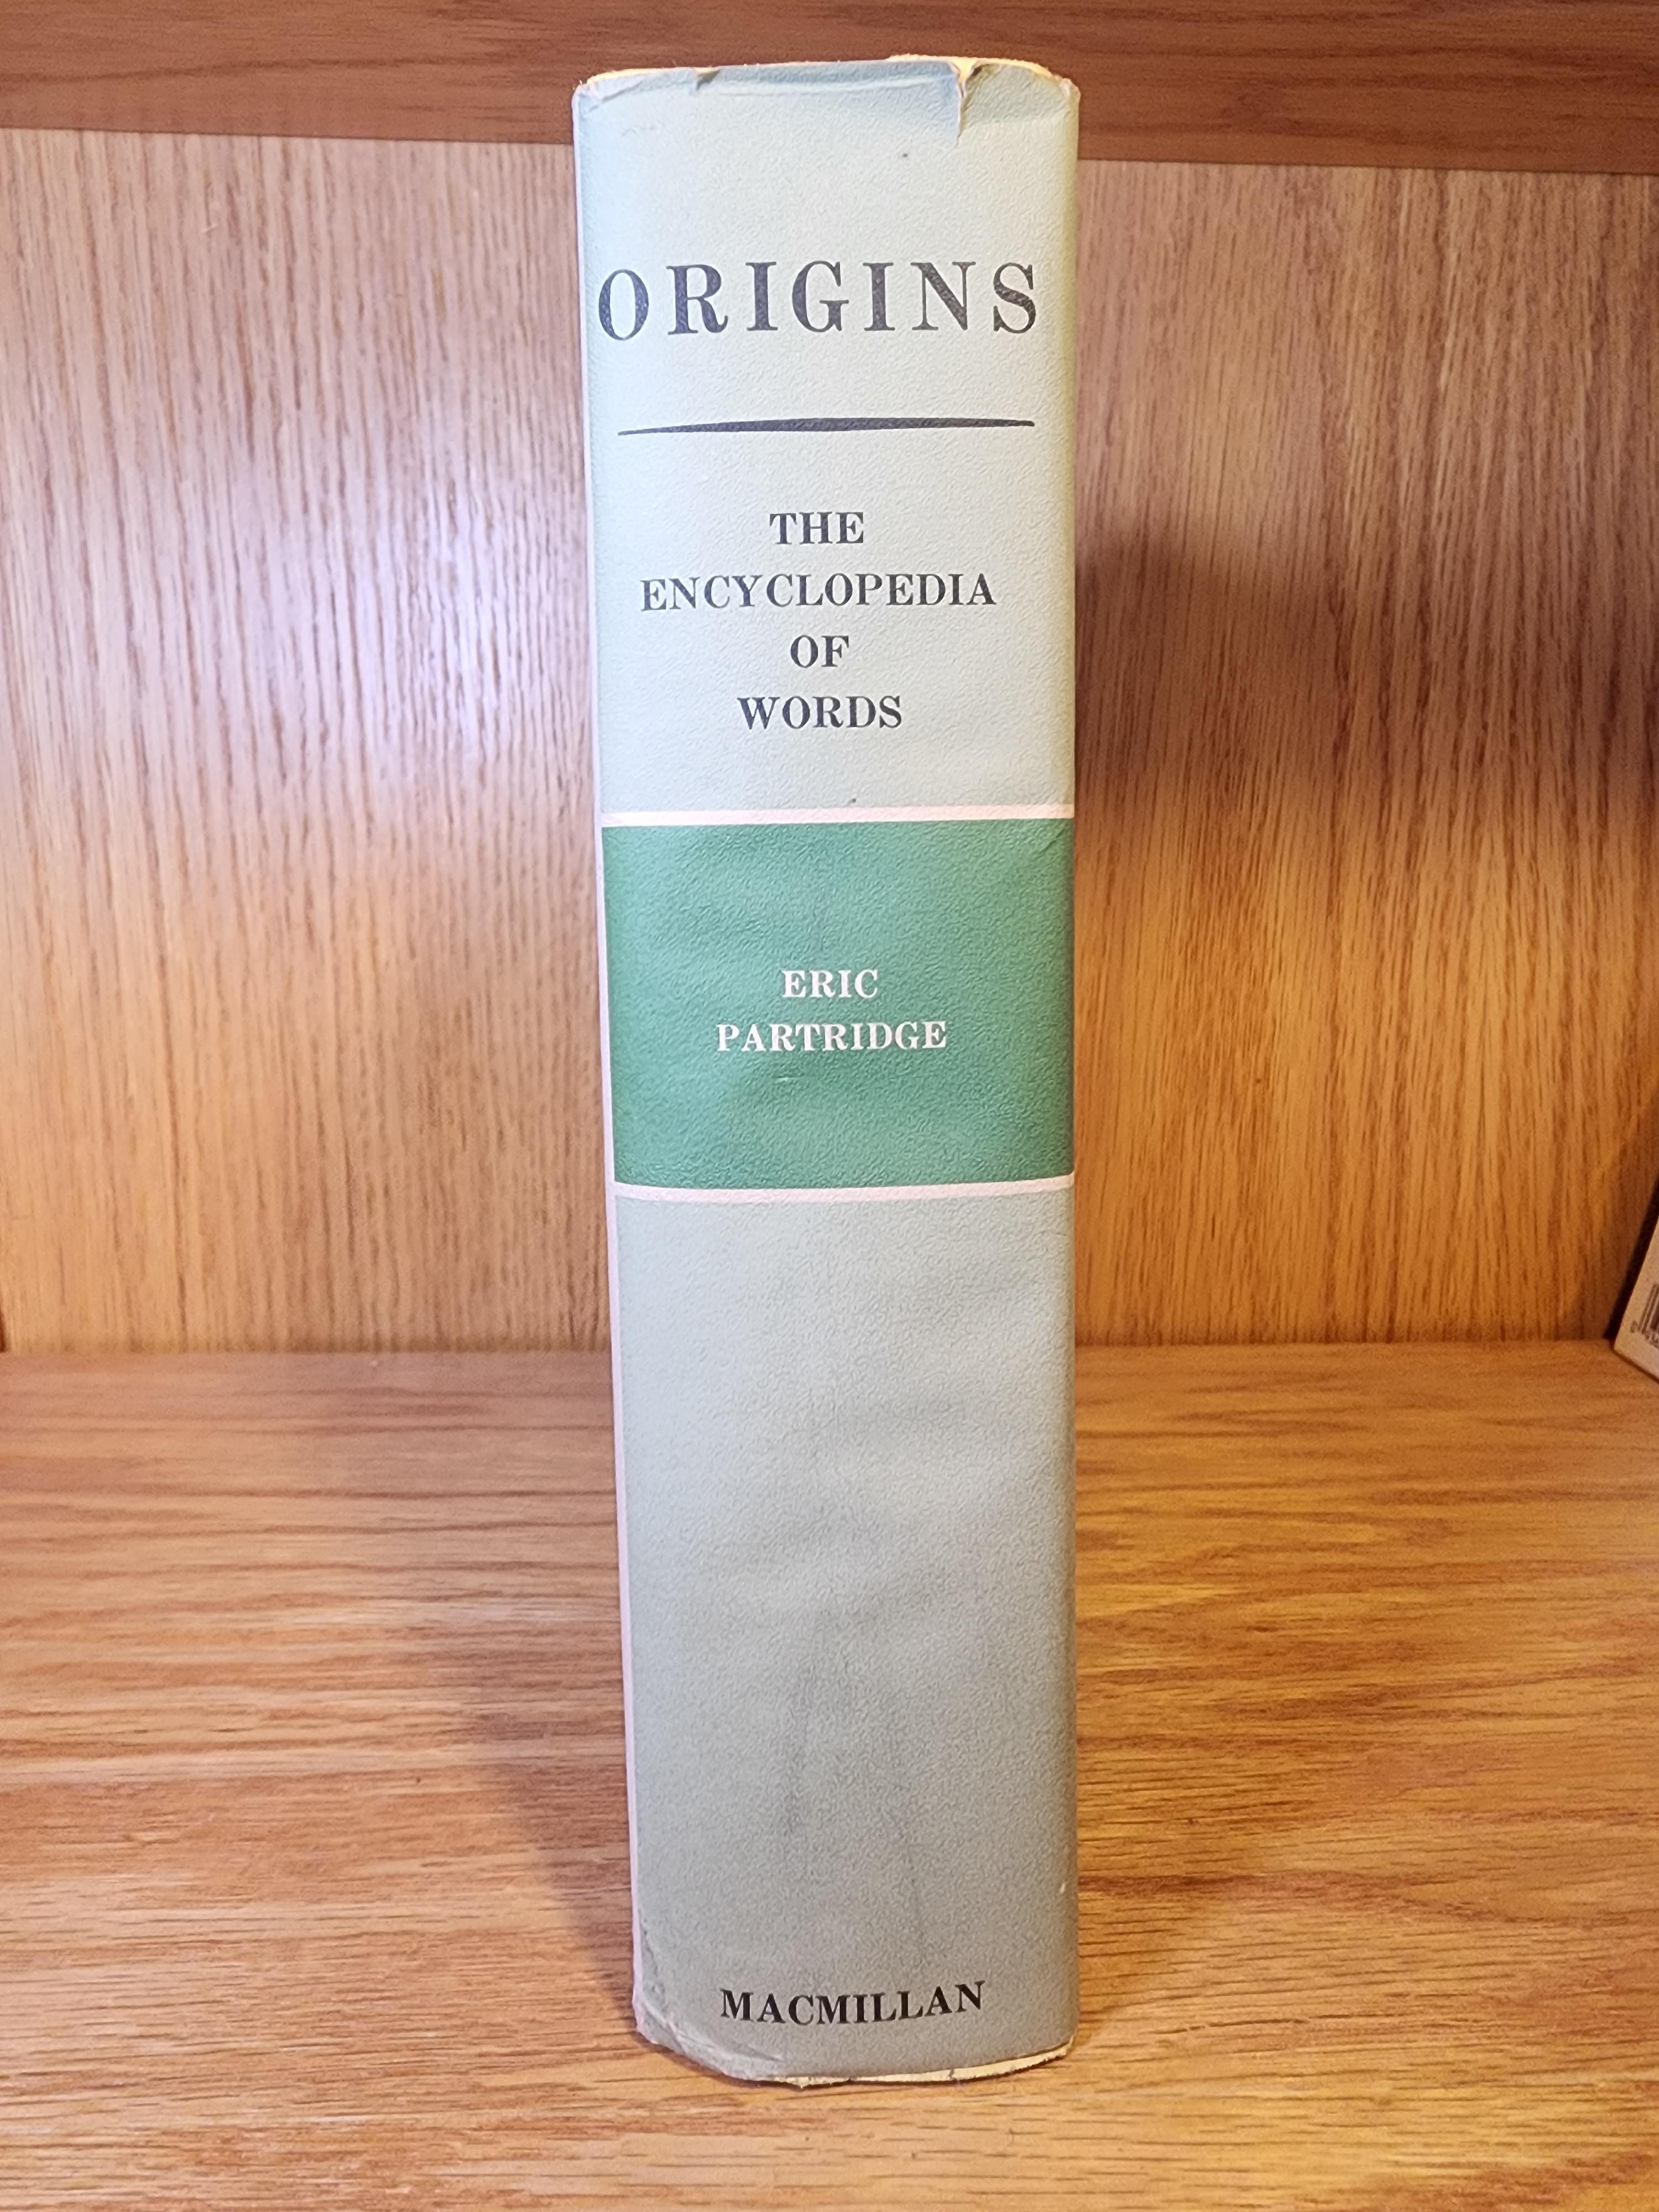 Origins: The Encyclopedia of Words- Their Meanings, Etymology and Uses Through History, Hardcover